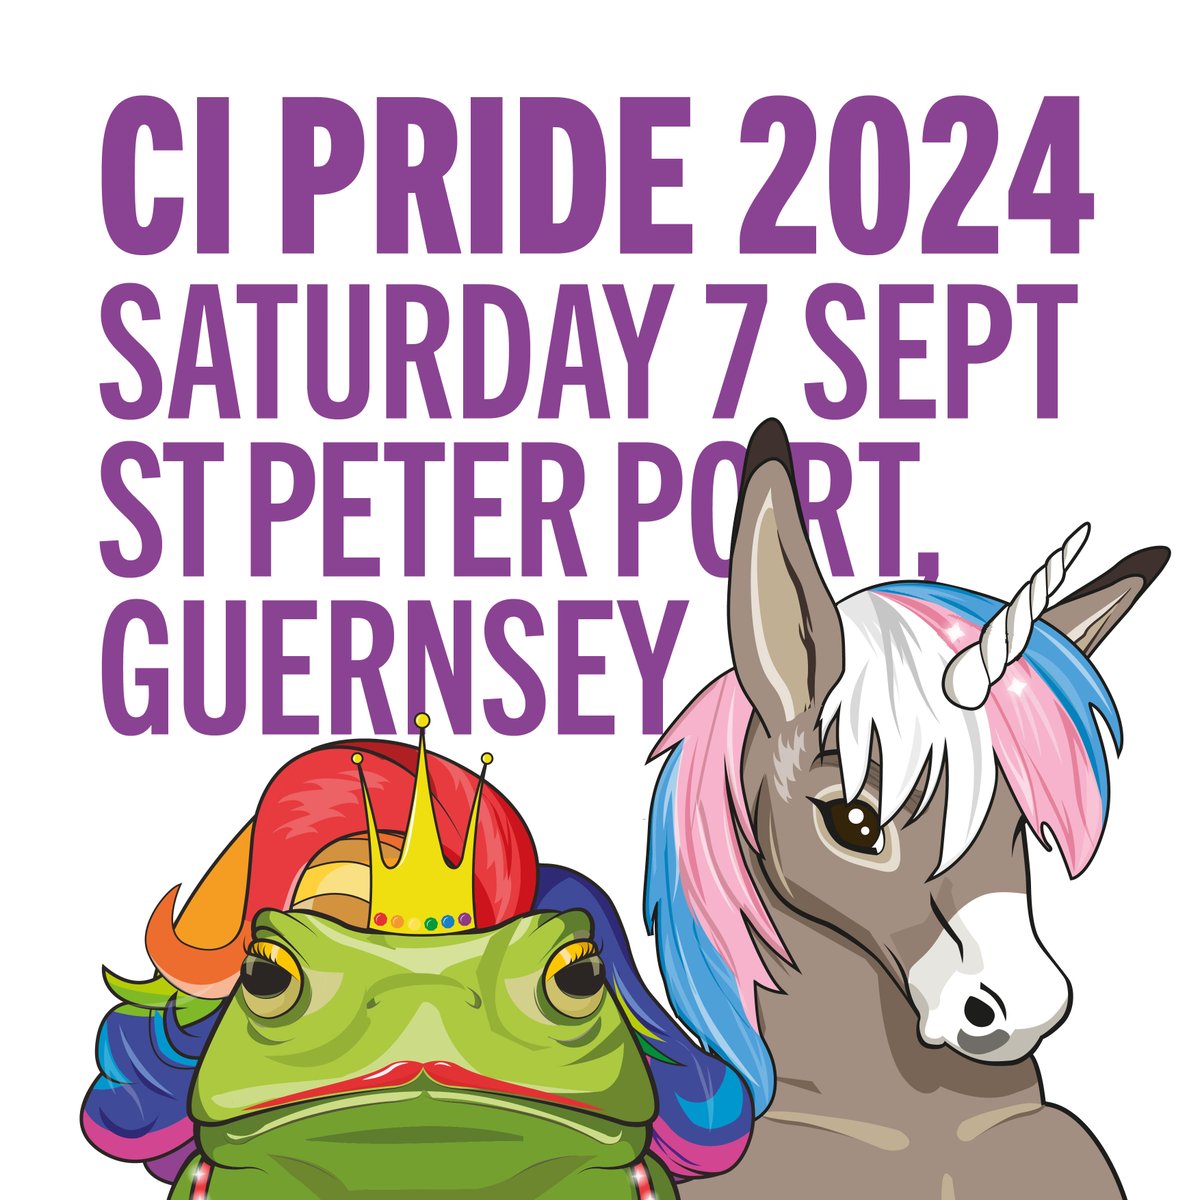 👀 Pssssst.... need something to get you going this morning? ⚡ It's only SIX MONTHS until CHANNEL ISLANDS PRIDE! That's it... that's the tea! ☕️🐸☕️🦄 Sip it how you want, just be there on 7th September! #CIPride2024 🏳️‍🌈🇬🇬🏳️‍⚧️🇯🇪🏳️‍🌈